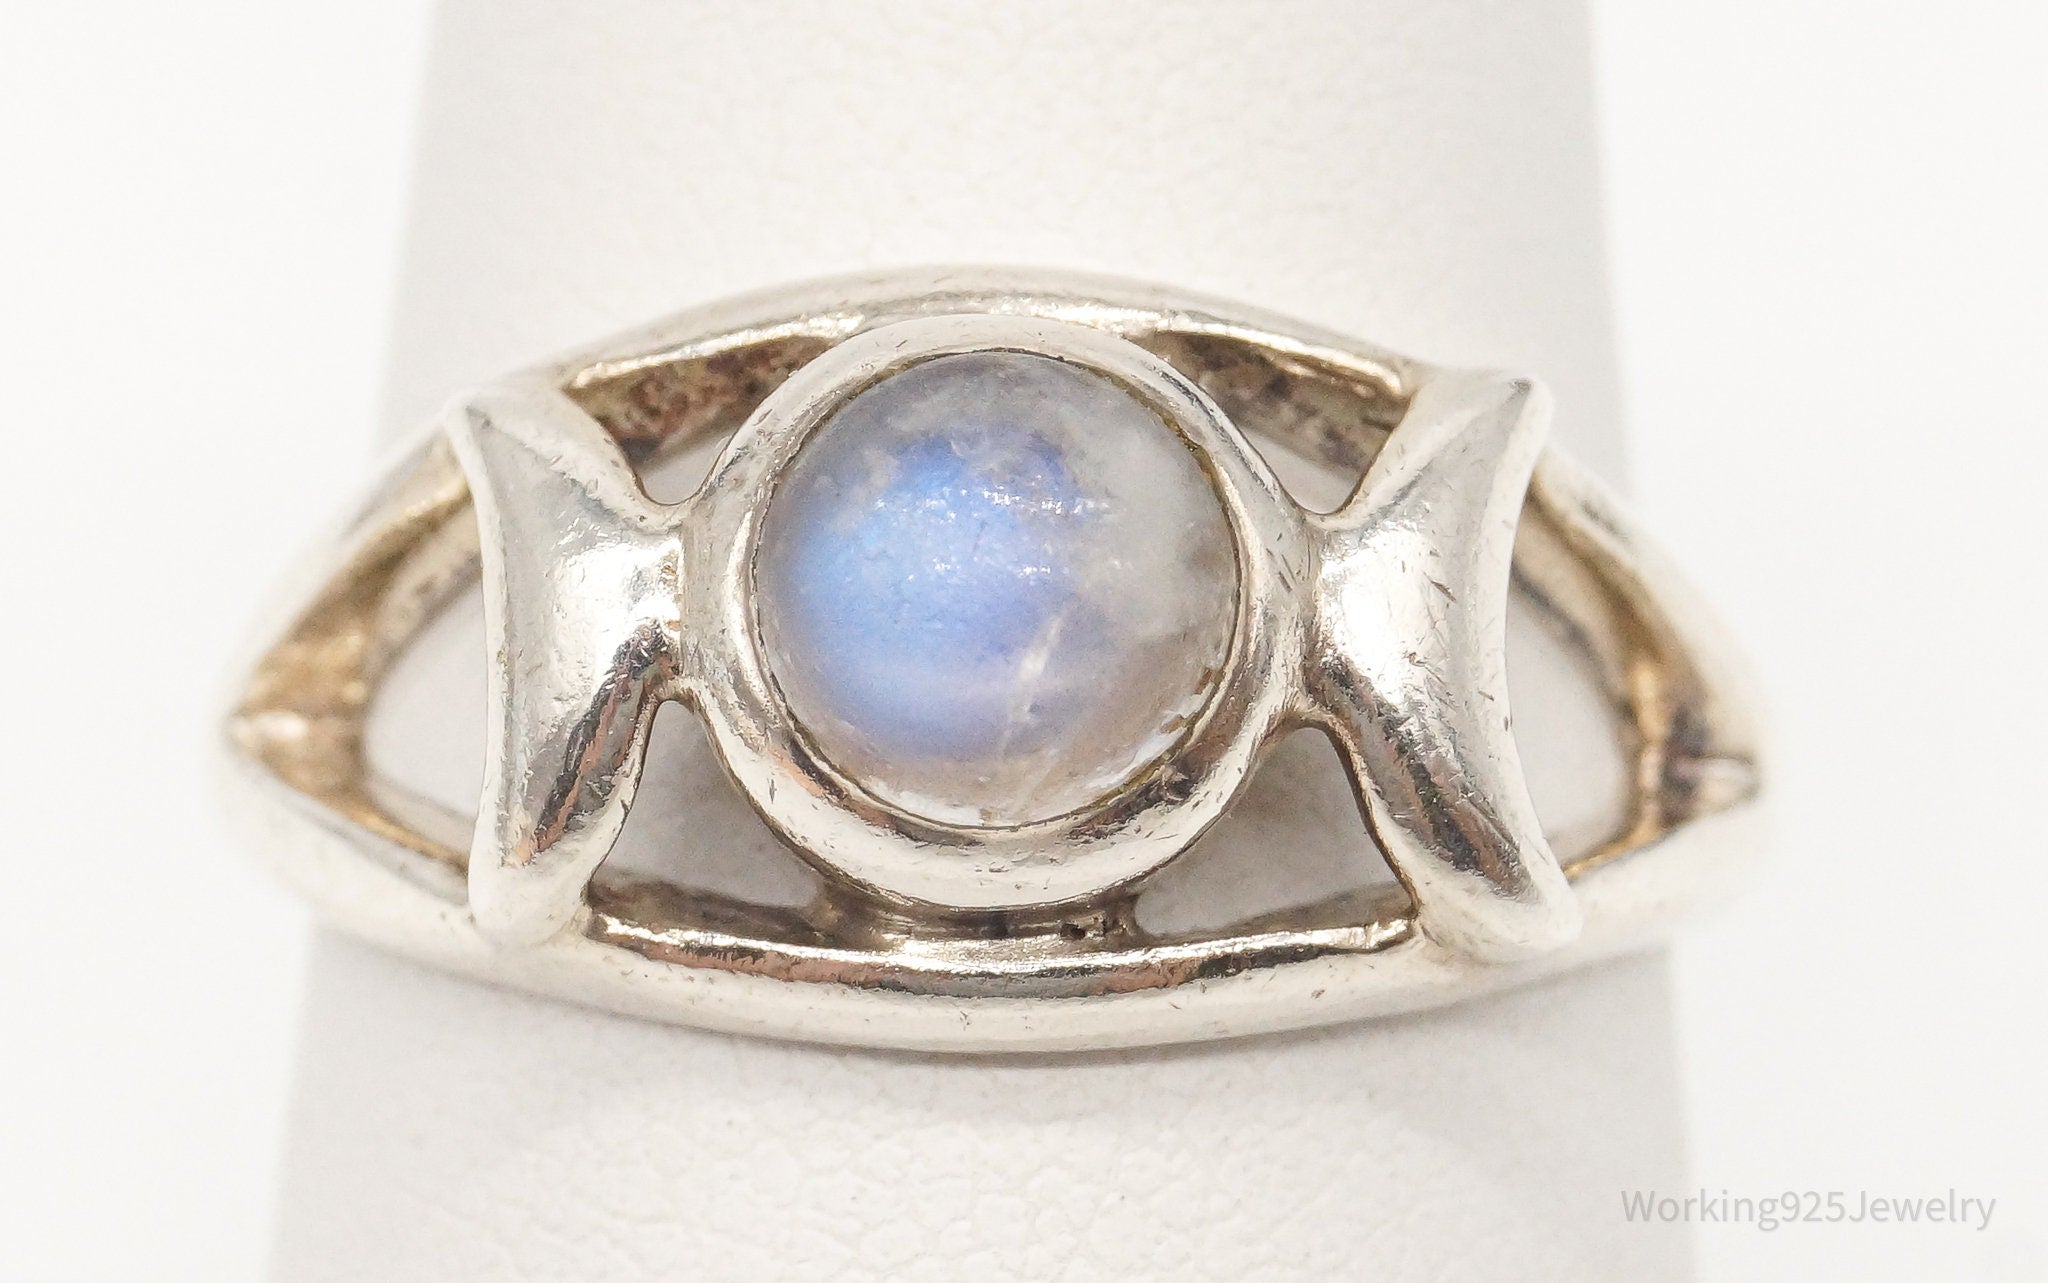 Vintage Triple Moon Moonstone Sterling Silver Ring - Size 7.5